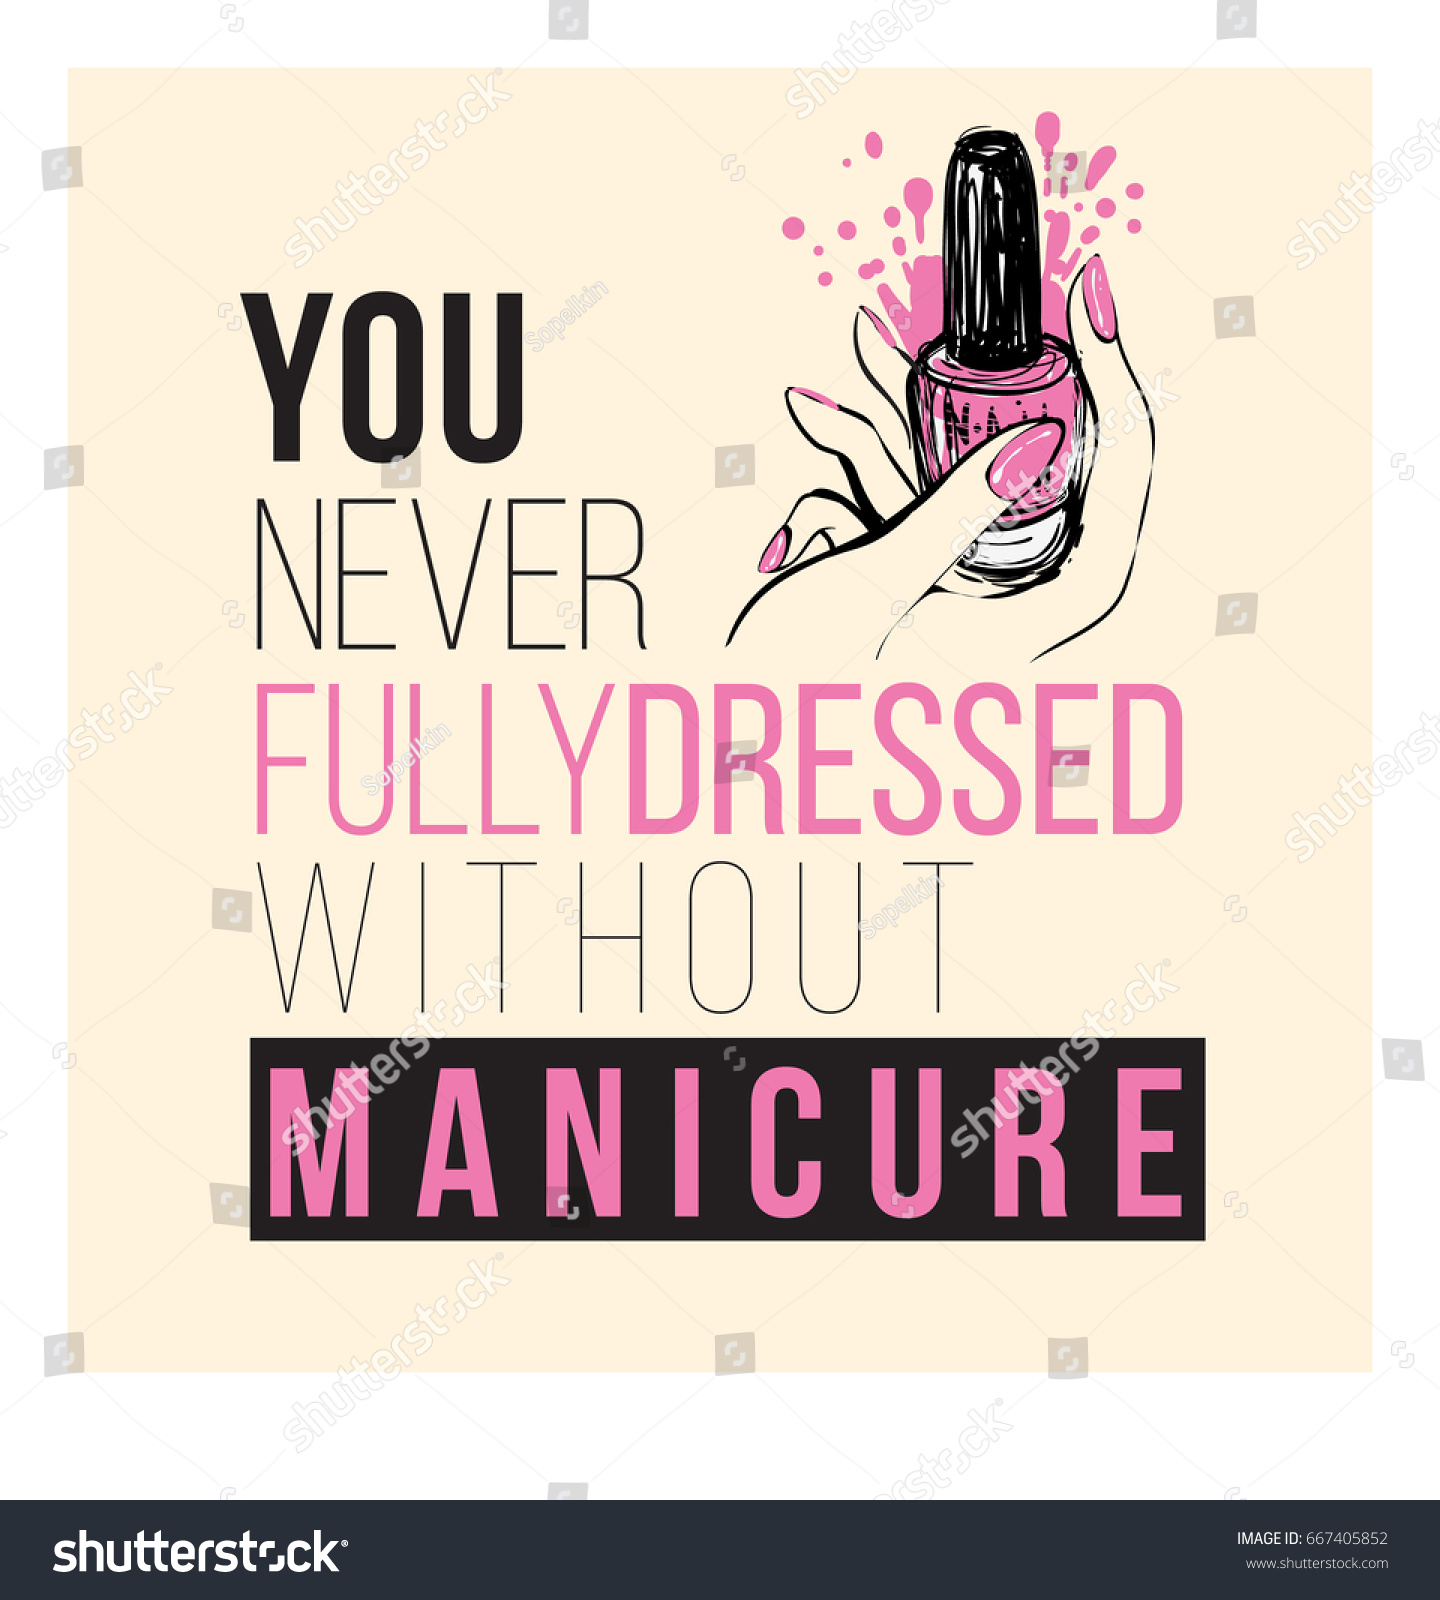 You Never Fully Dressed Without Manicure Stock Vector 667405852 ...